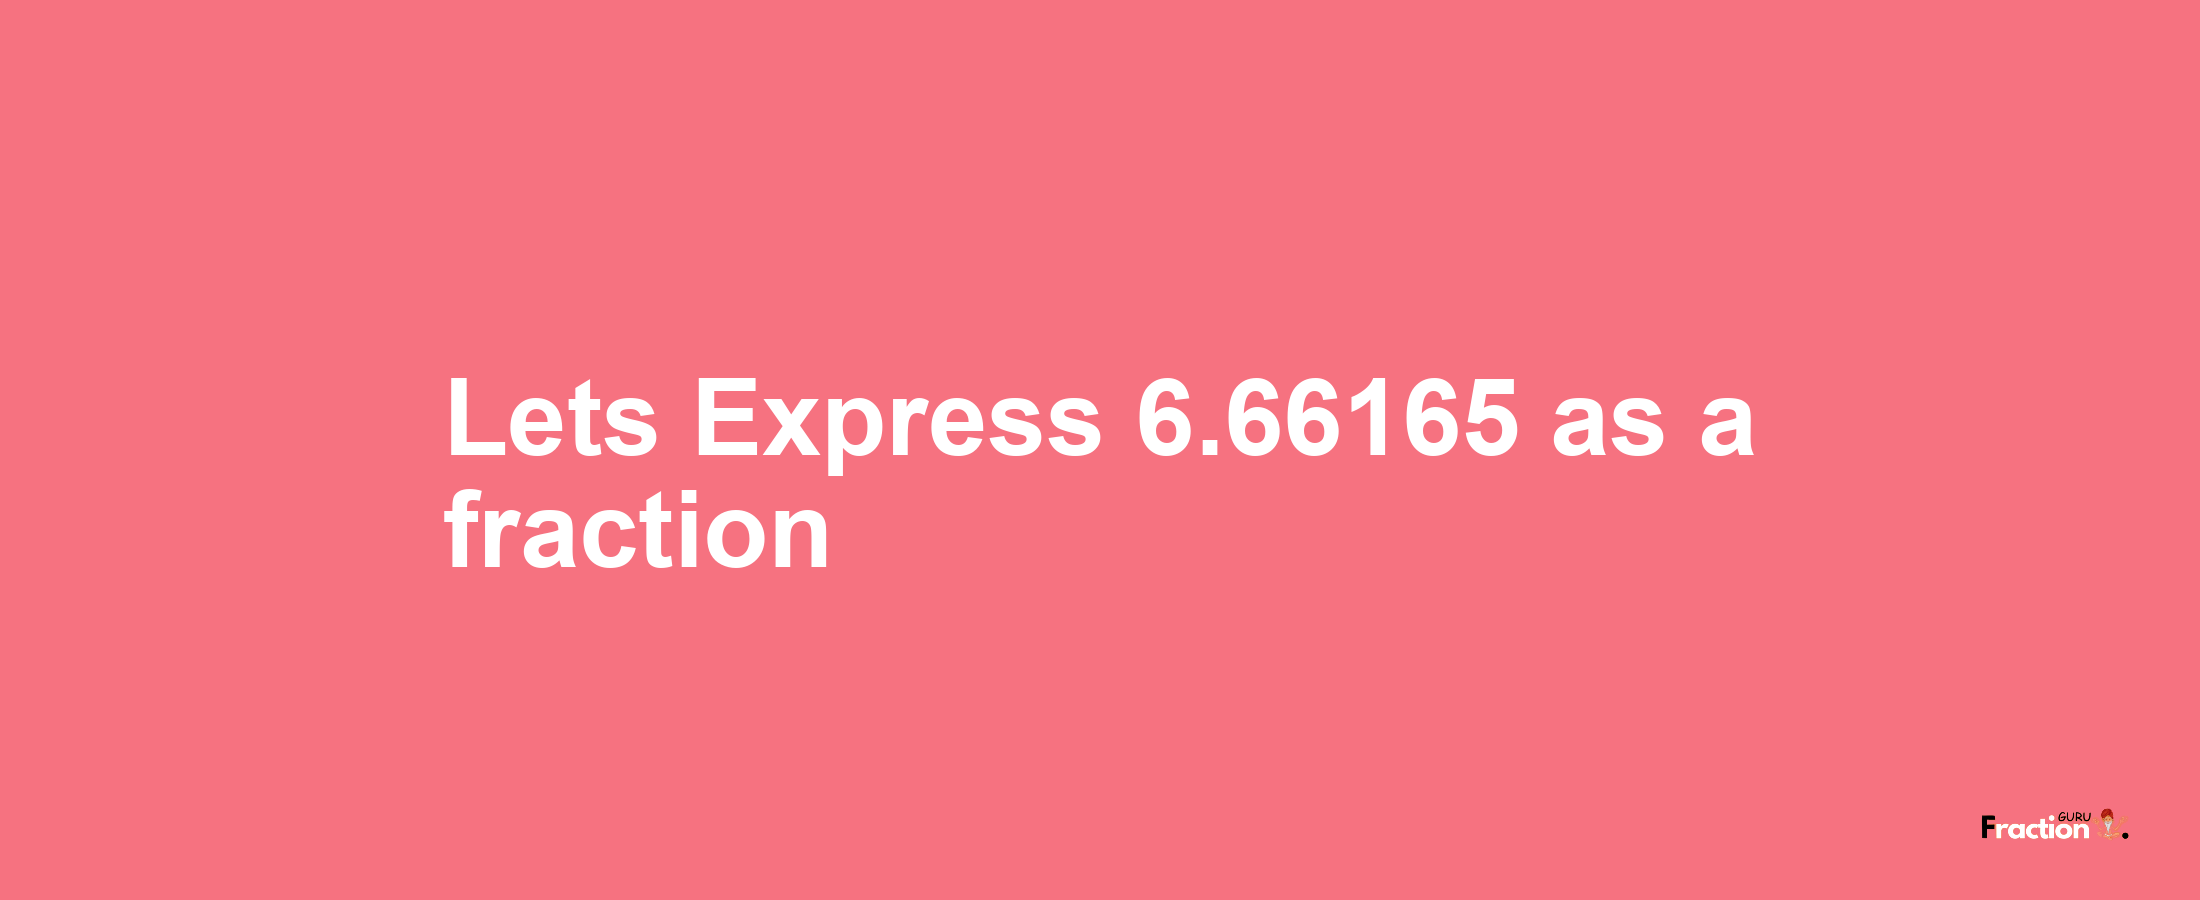 Lets Express 6.66165 as afraction